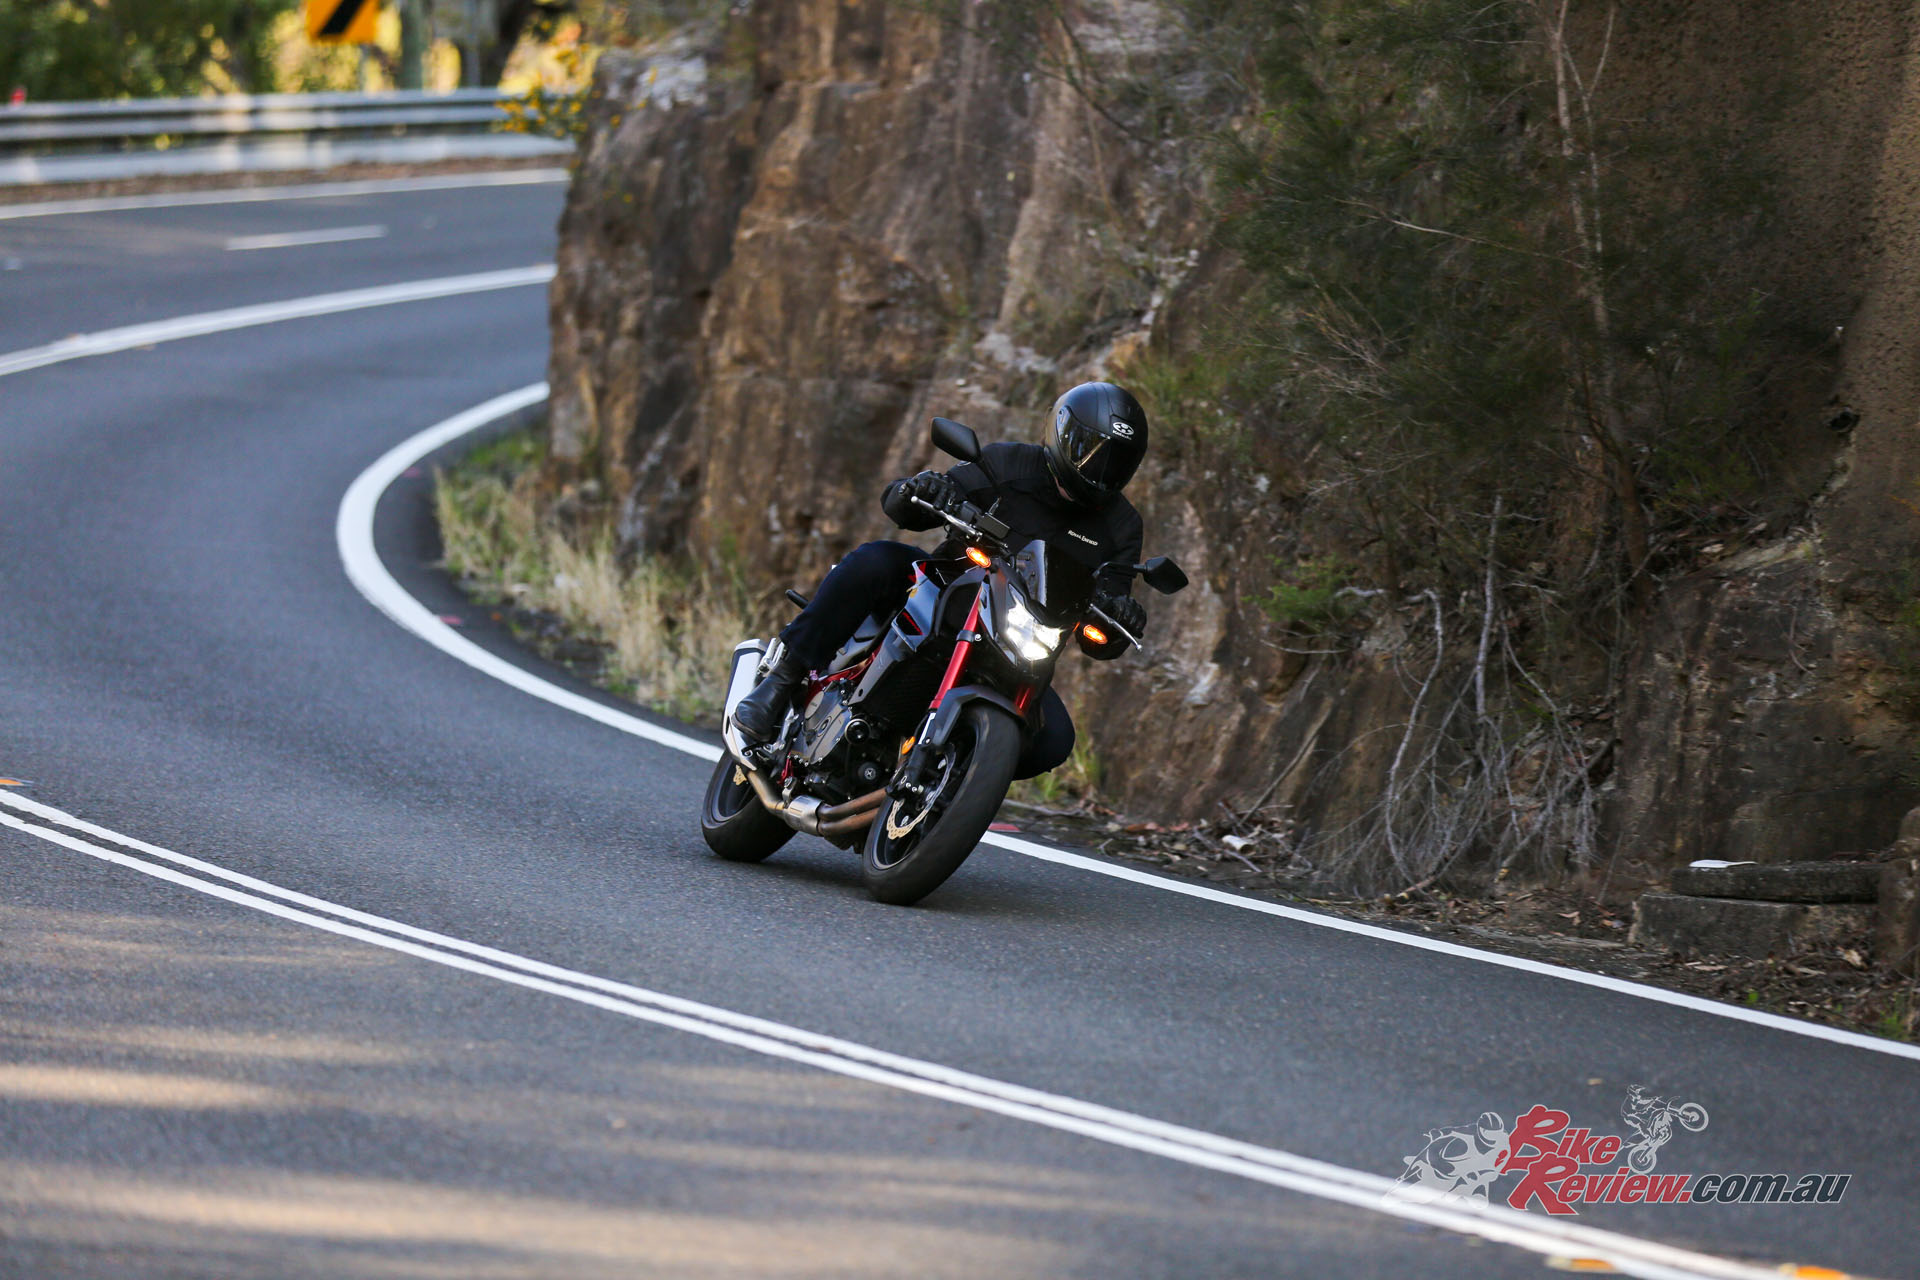 "Take this little thing up through the twisties and the Hornet shows its true colours, leaning into those curves with a kind of slick effortlessness that's just awesome. This is where the Hornet truly shines.'